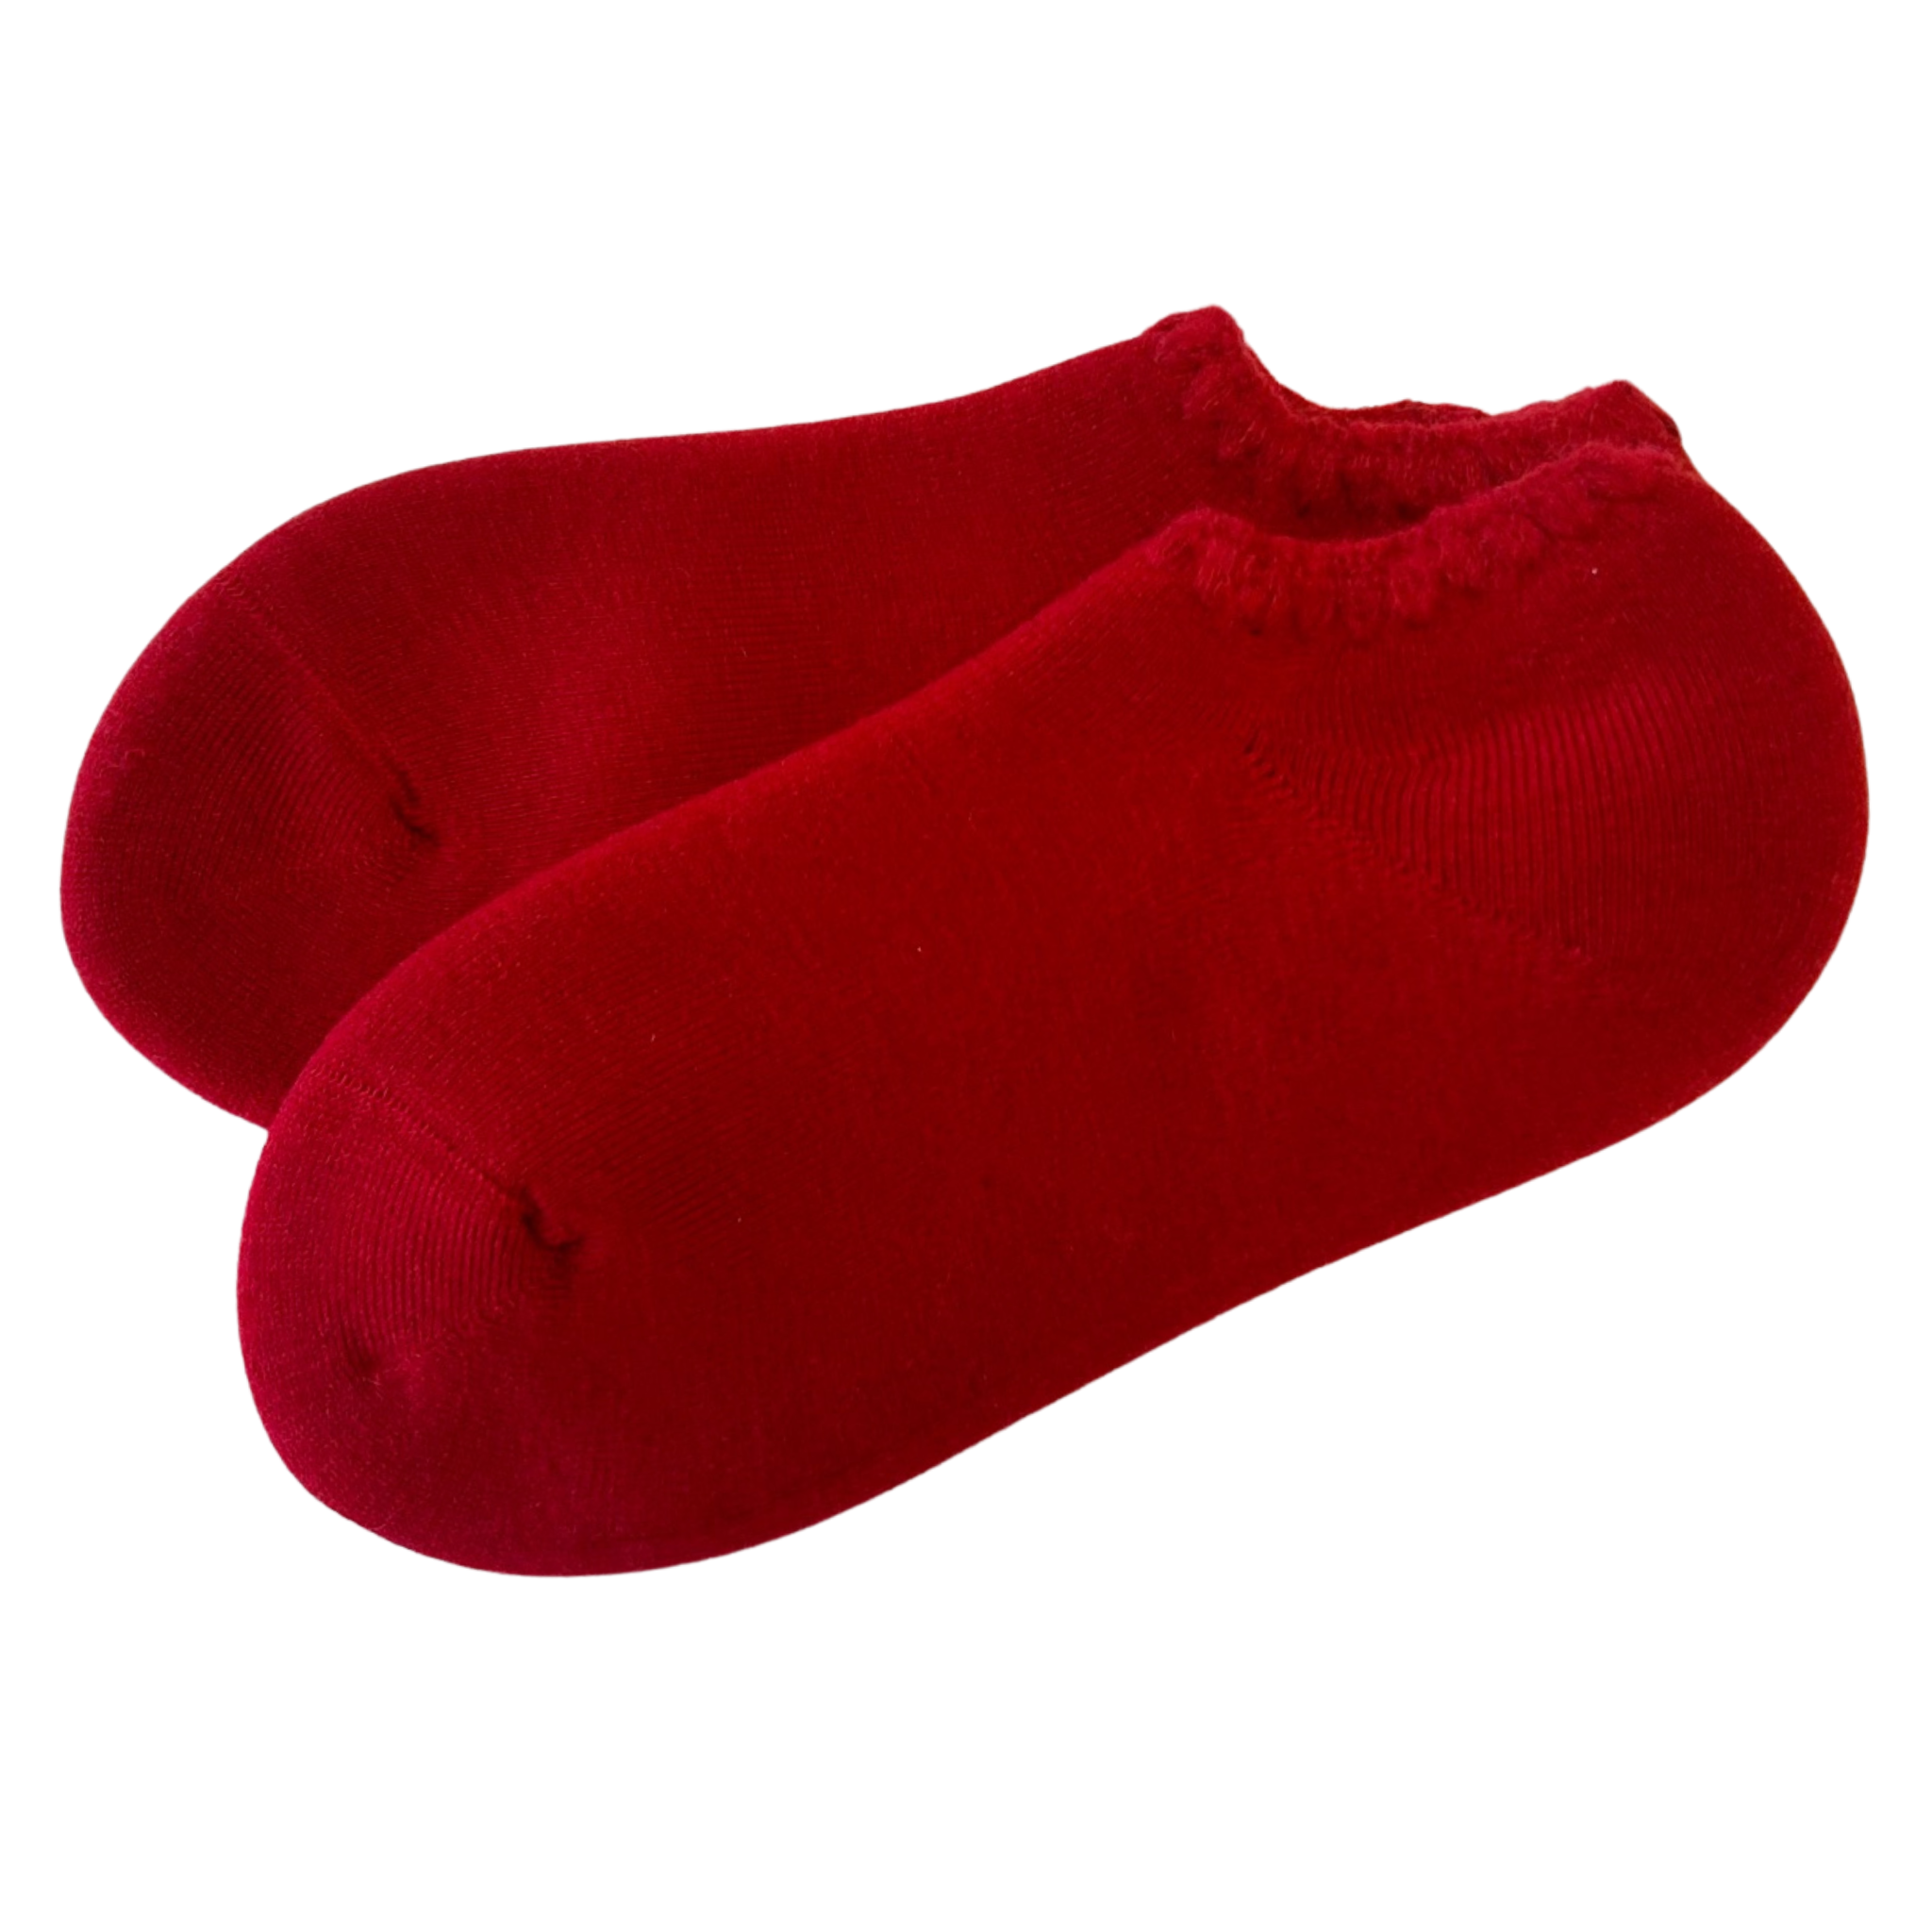 Handcrafted Wool Slipper Socks | No Grip | Large | 8 Colors - CHERRYSTONEstyle